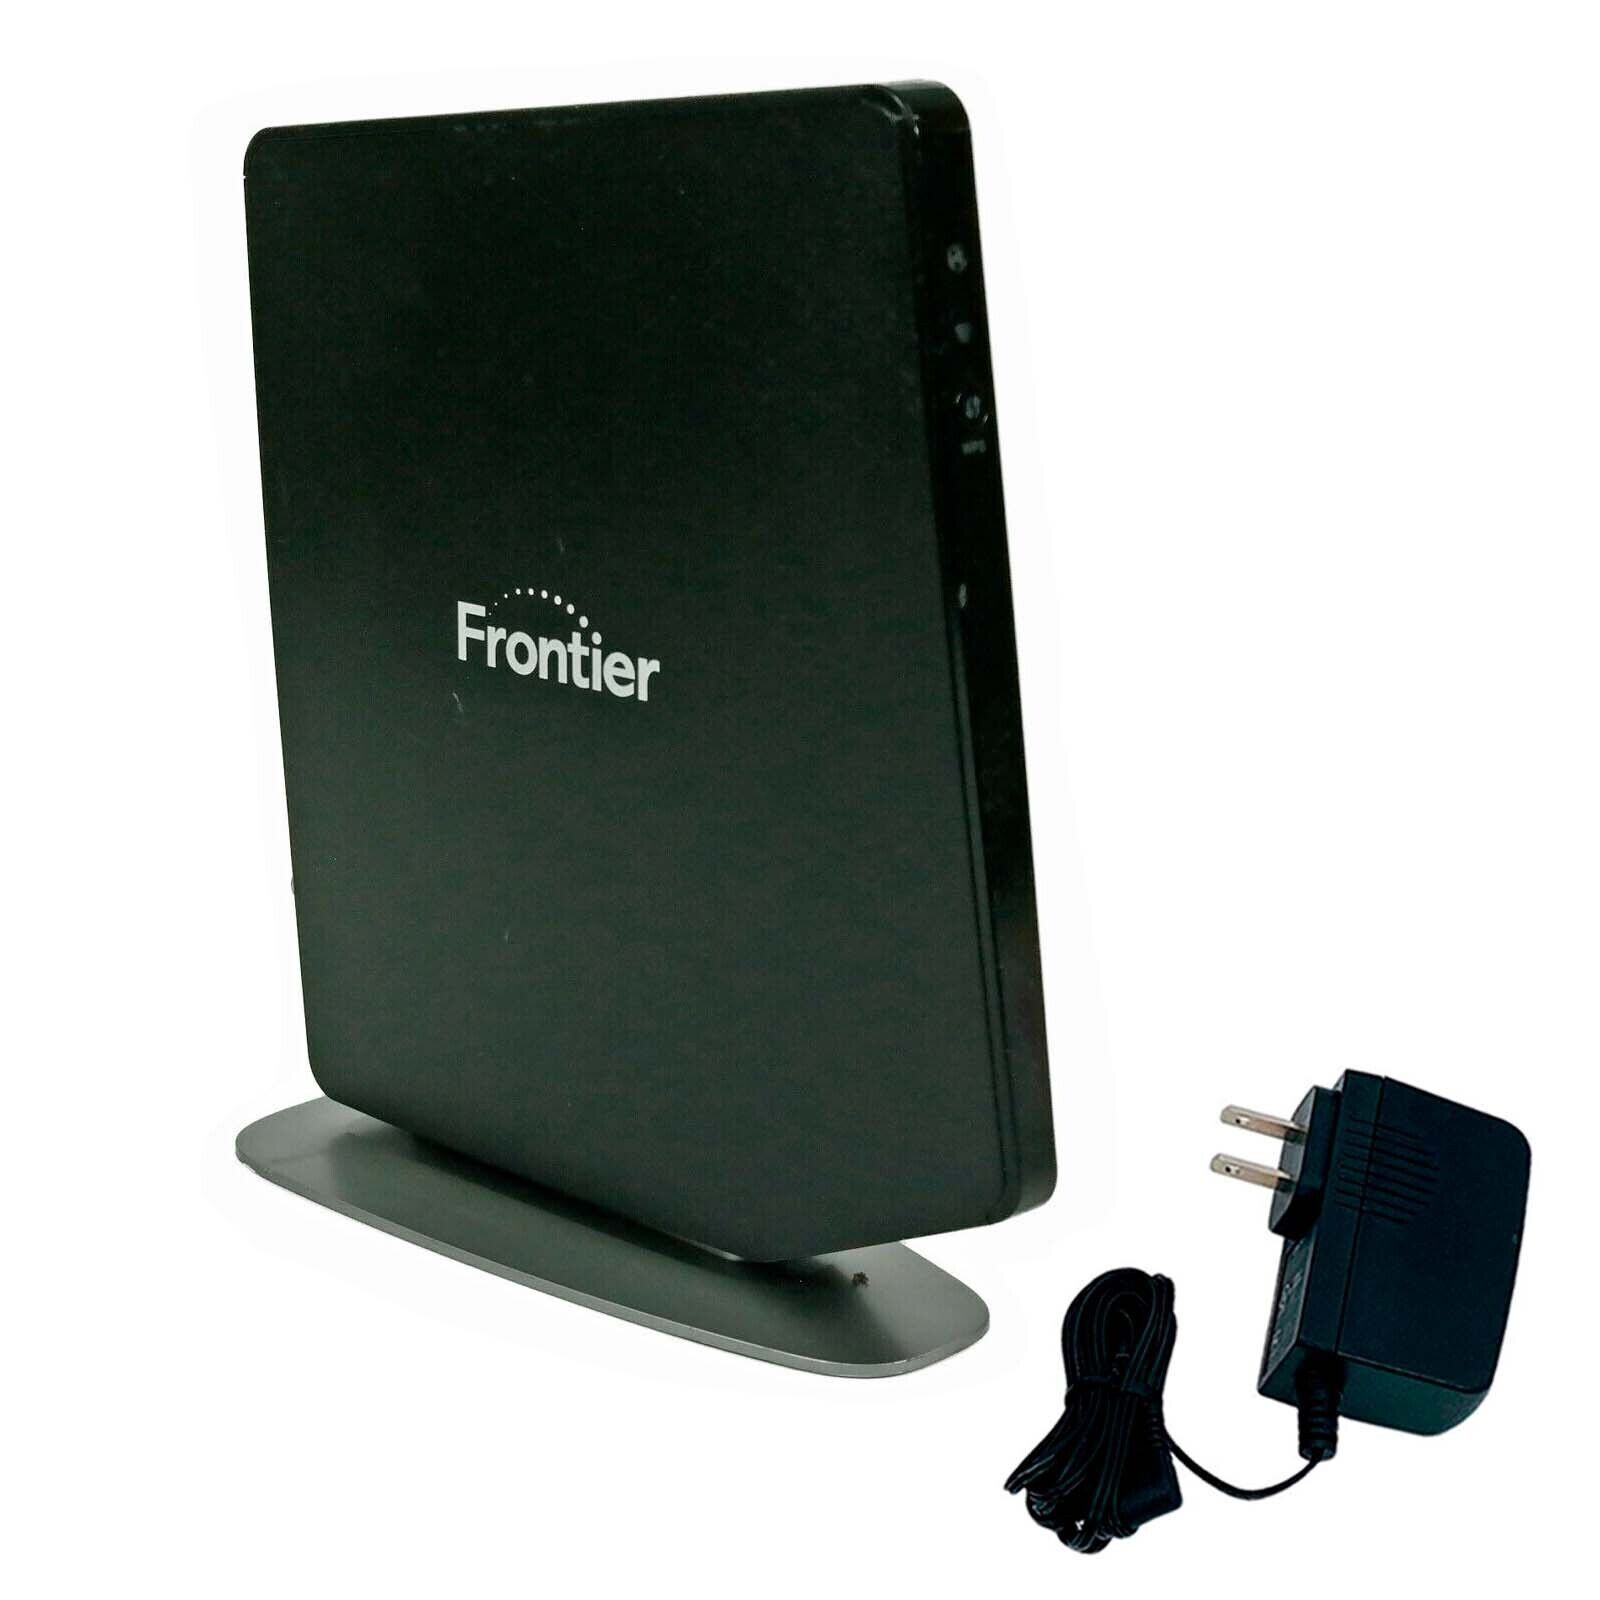 Frontier FiOS-G1100 Quantum Gateway Wireless Dual Band Router Modem w/ Adapter